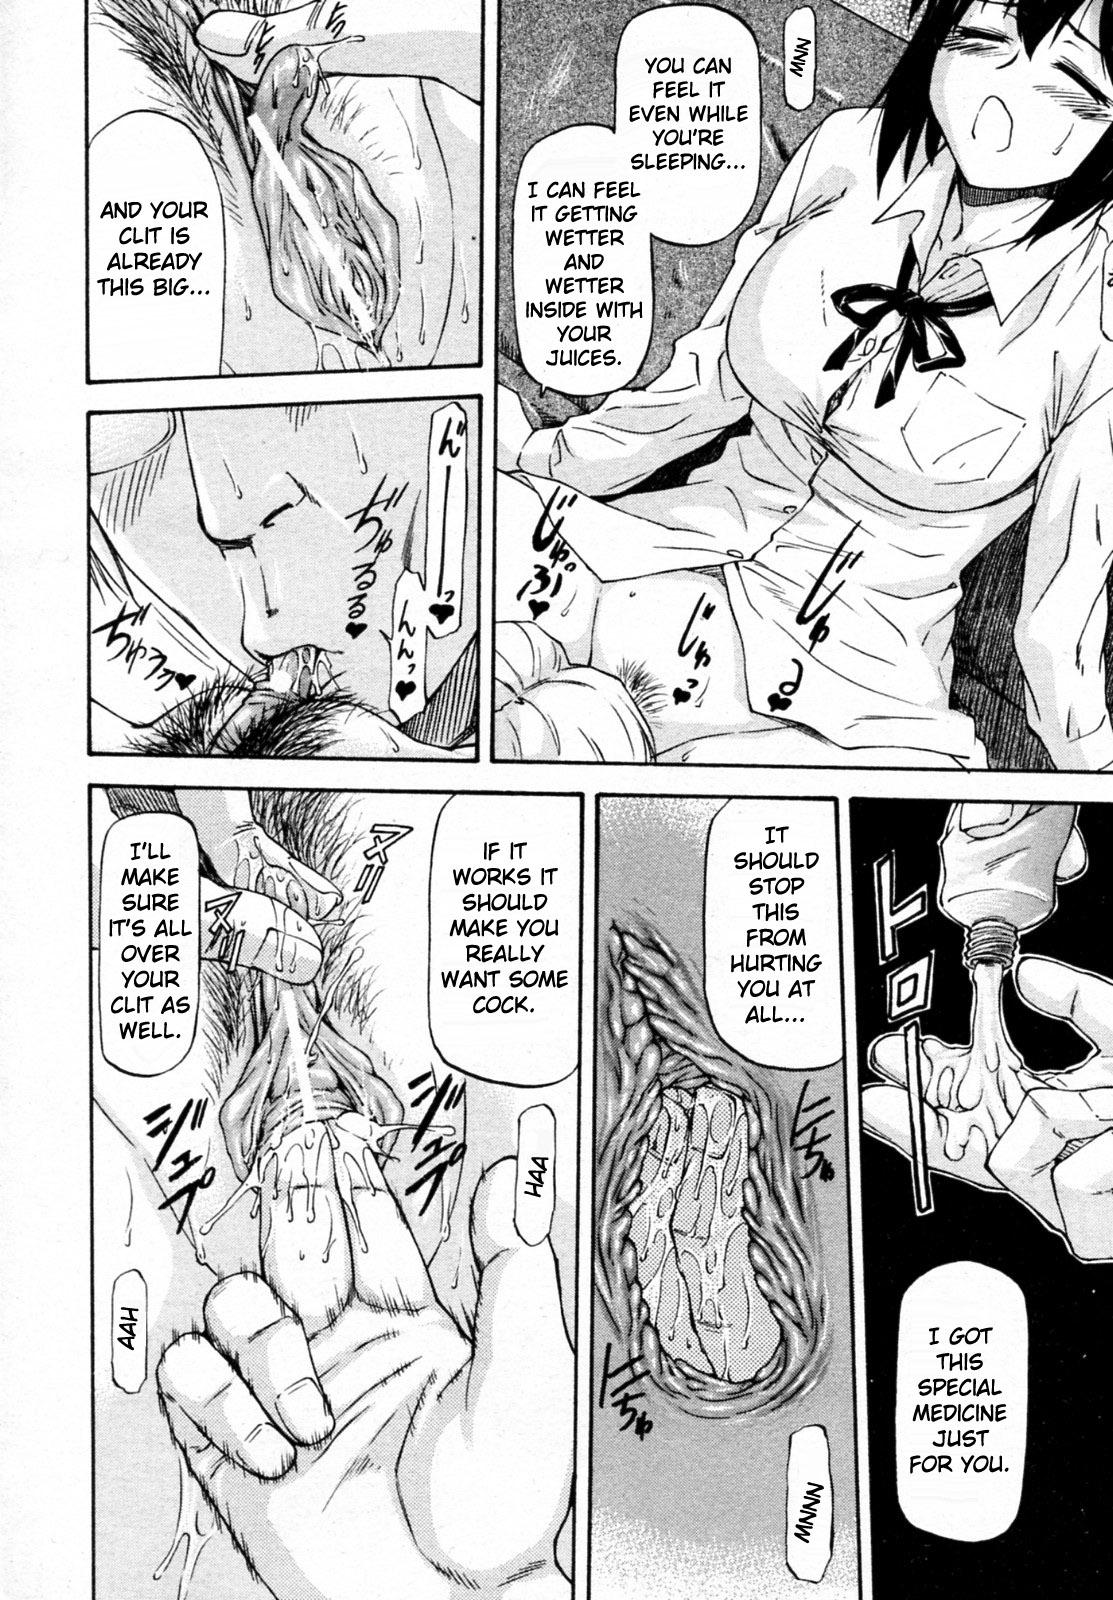 [Nagare Ippon] Meat Hole Ch.02-04,07-09 [English] 9